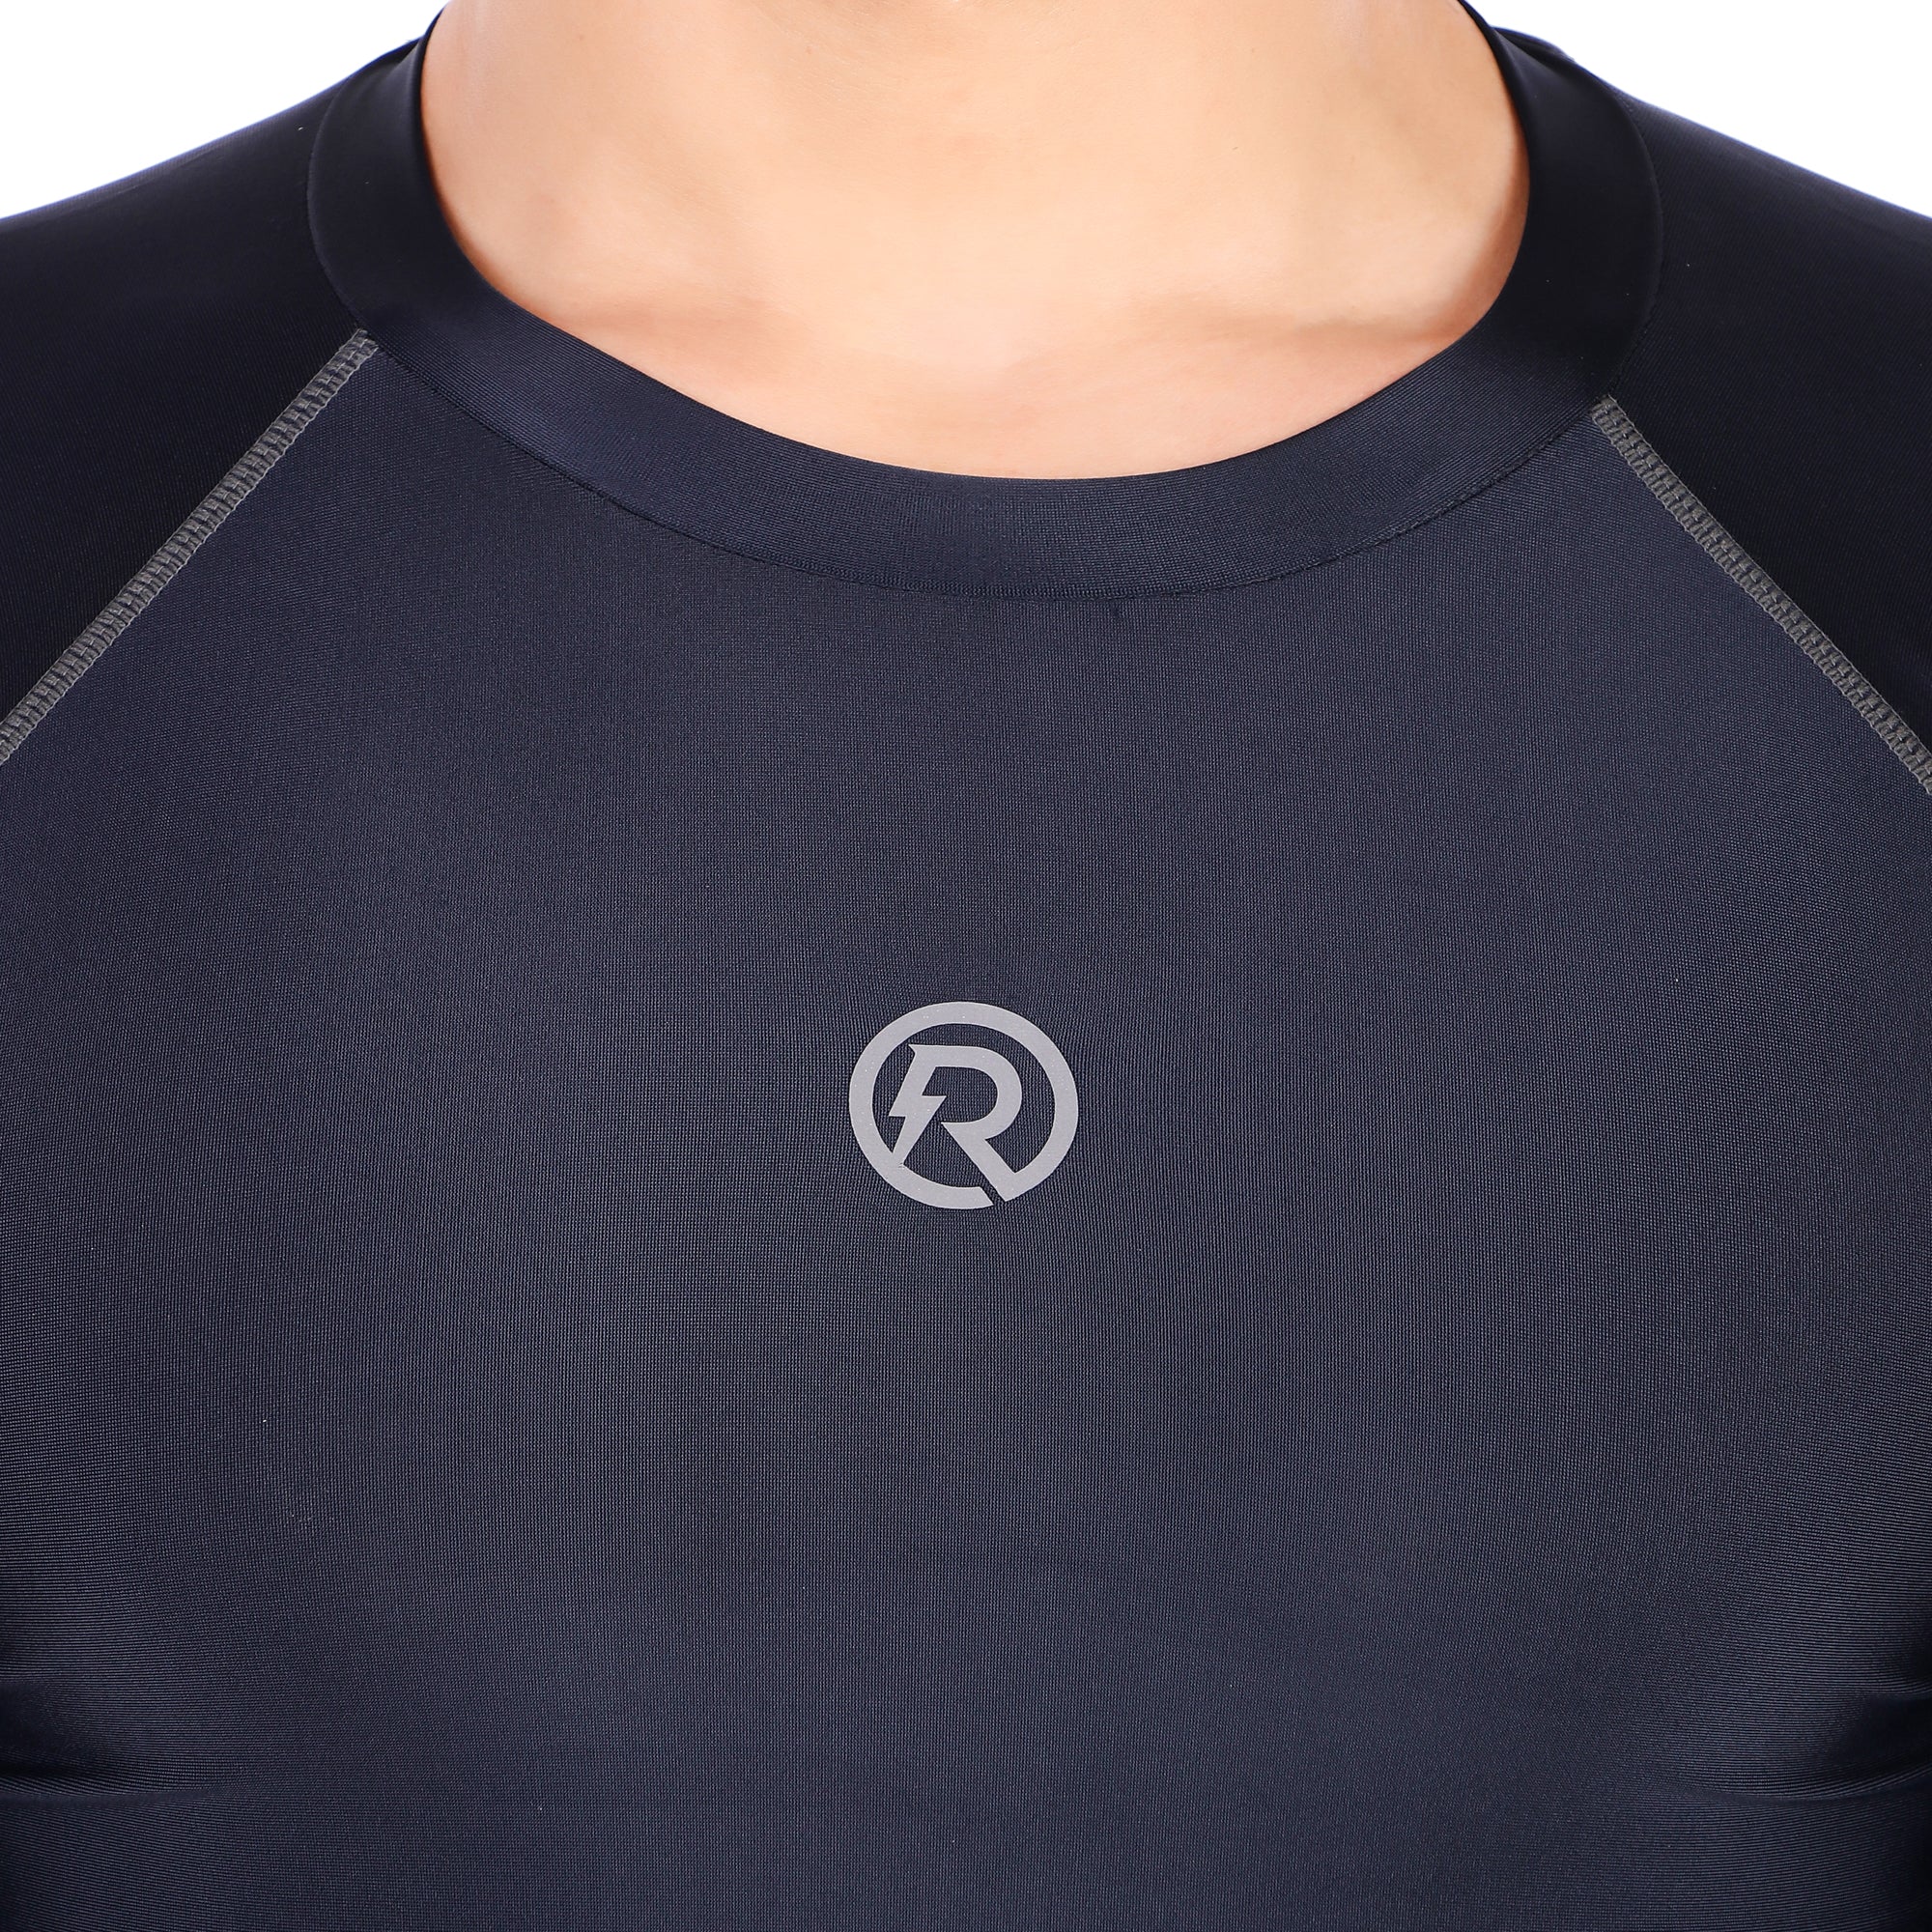 Recharge Polyester Compression Top Full Sleeve (Navy Blue)